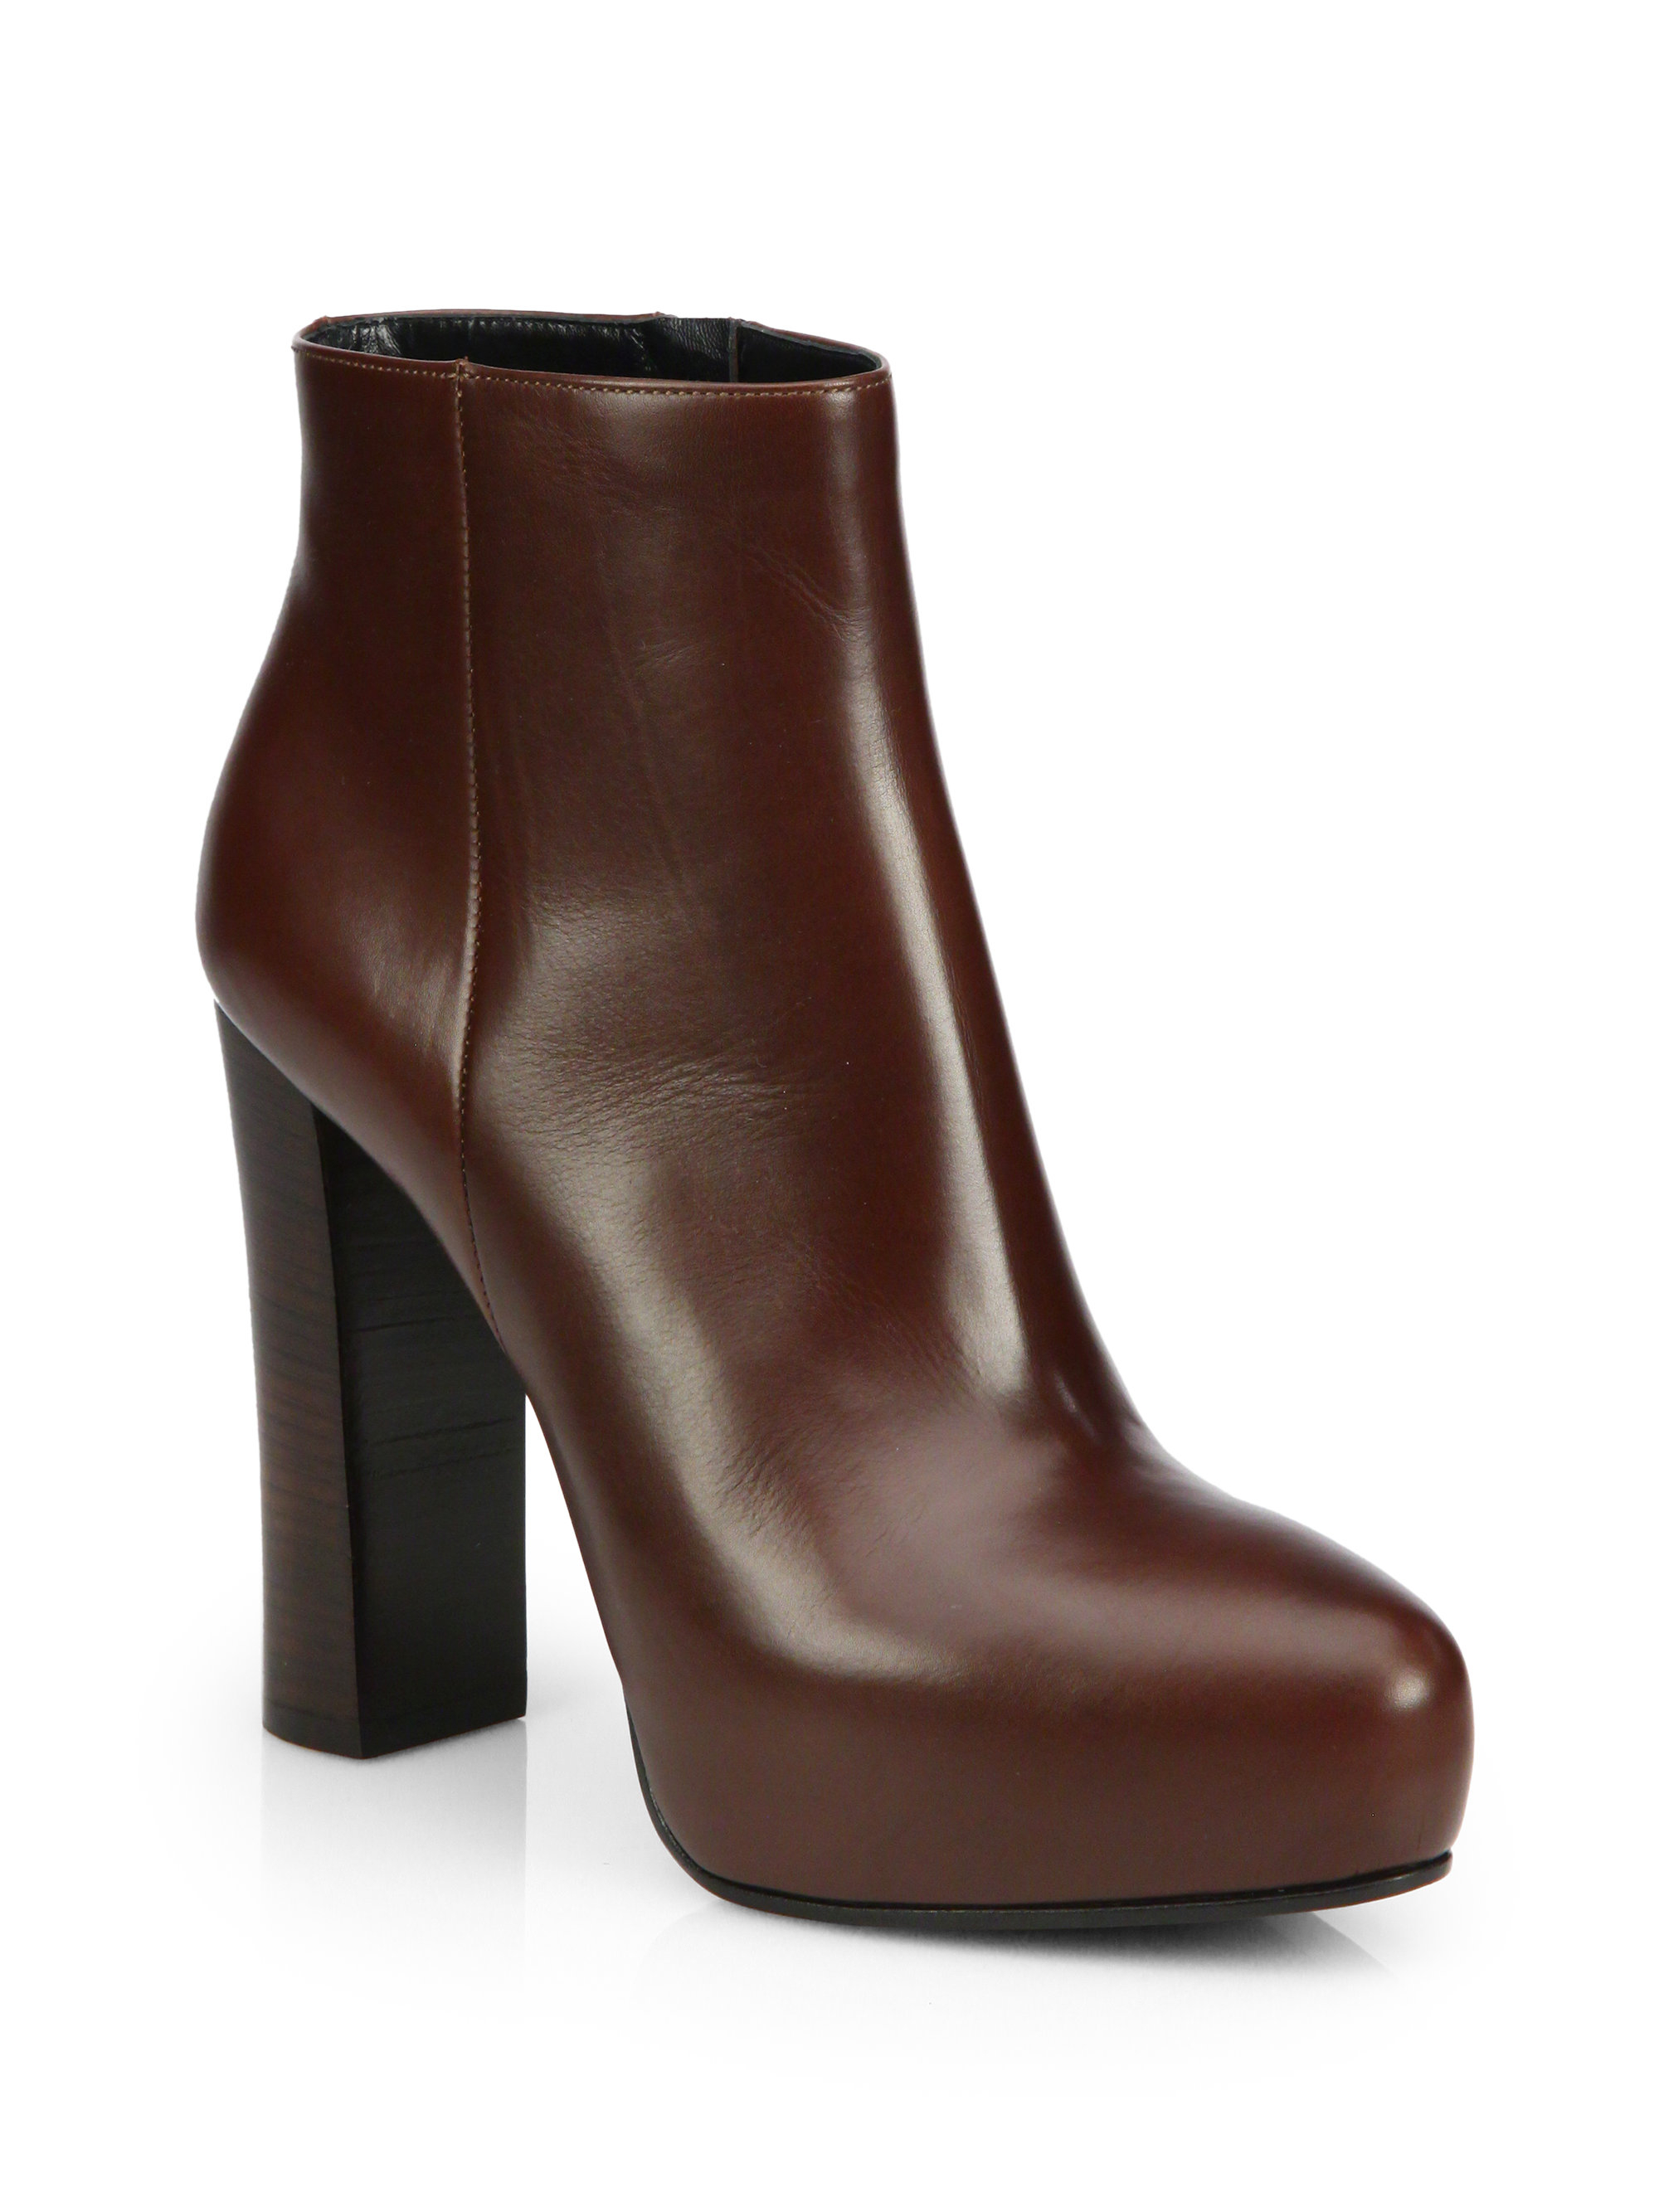 brown ankle boots gallery XECELKQ